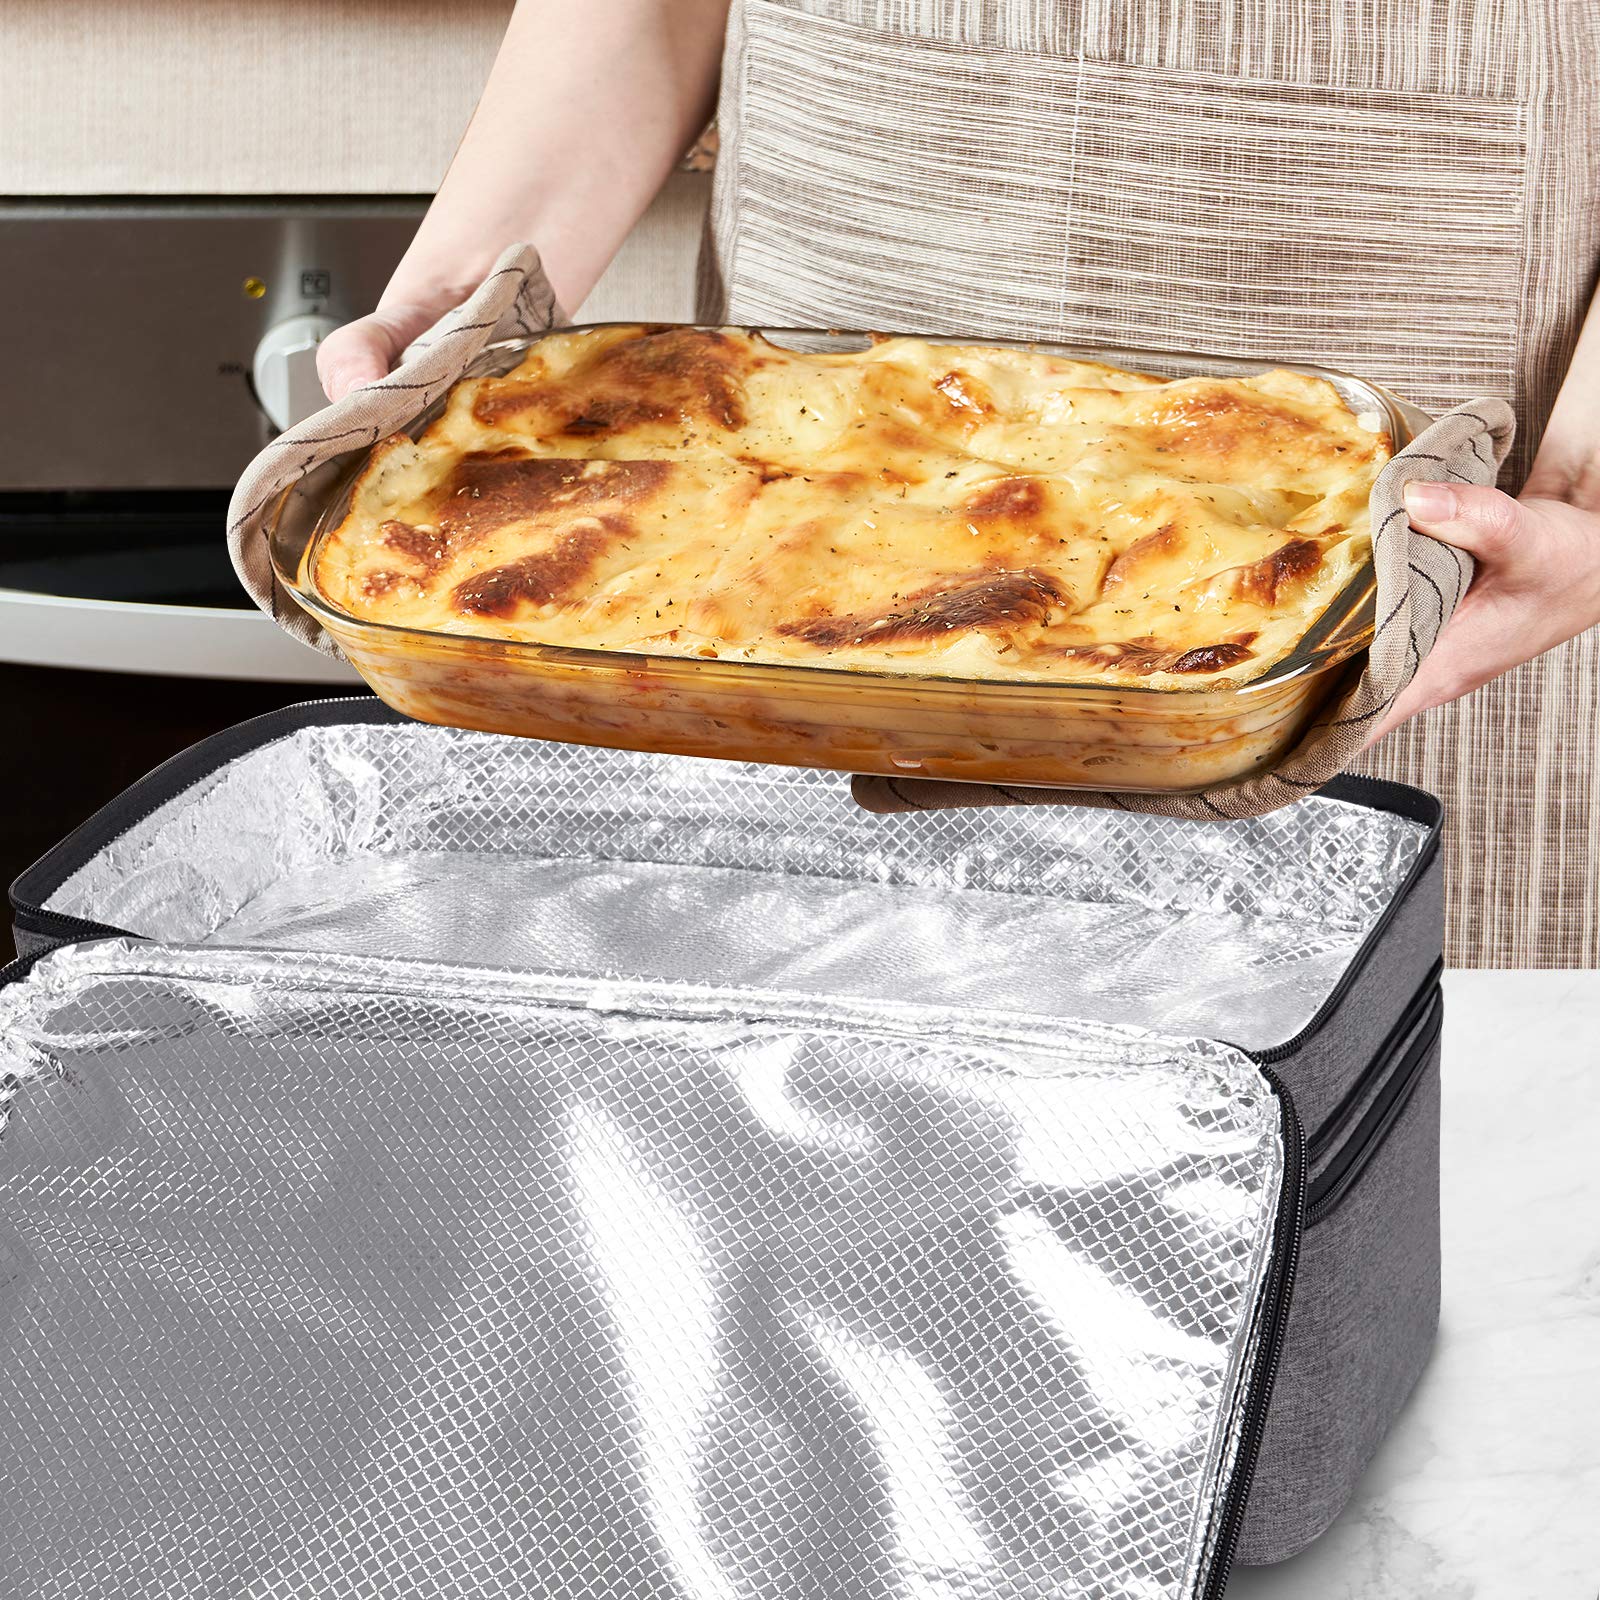 LHZK Double Decker Insulated Casserole Carrier for Hot or Cold Food, Expandable Hot Food Carrier, Lasagna Holder Tote for Potluck Parties, Picnic, Beach, Fits 11 x 15 or 9 x 13 Baking Dish (Grey)